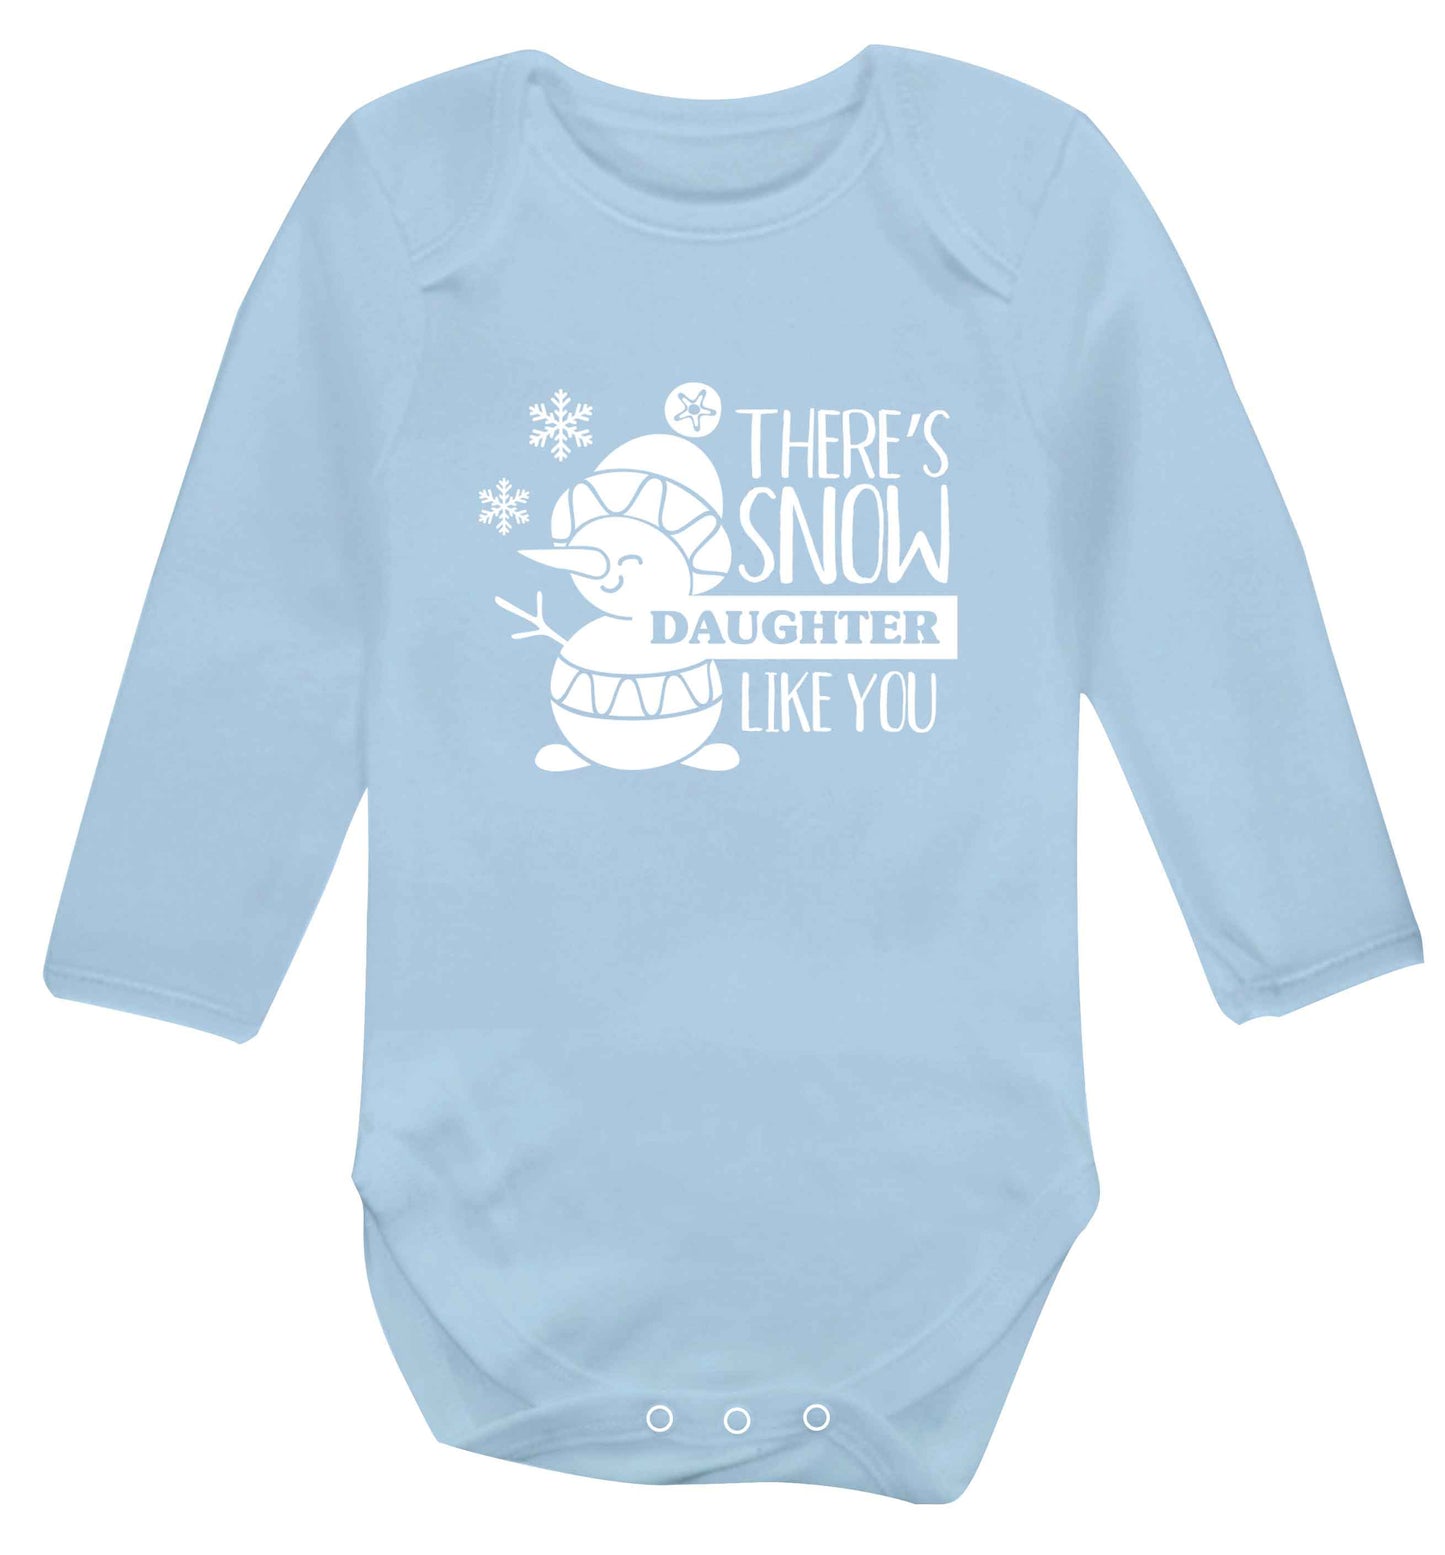 There's snow daughter like you baby vest long sleeved pale blue 6-12 months